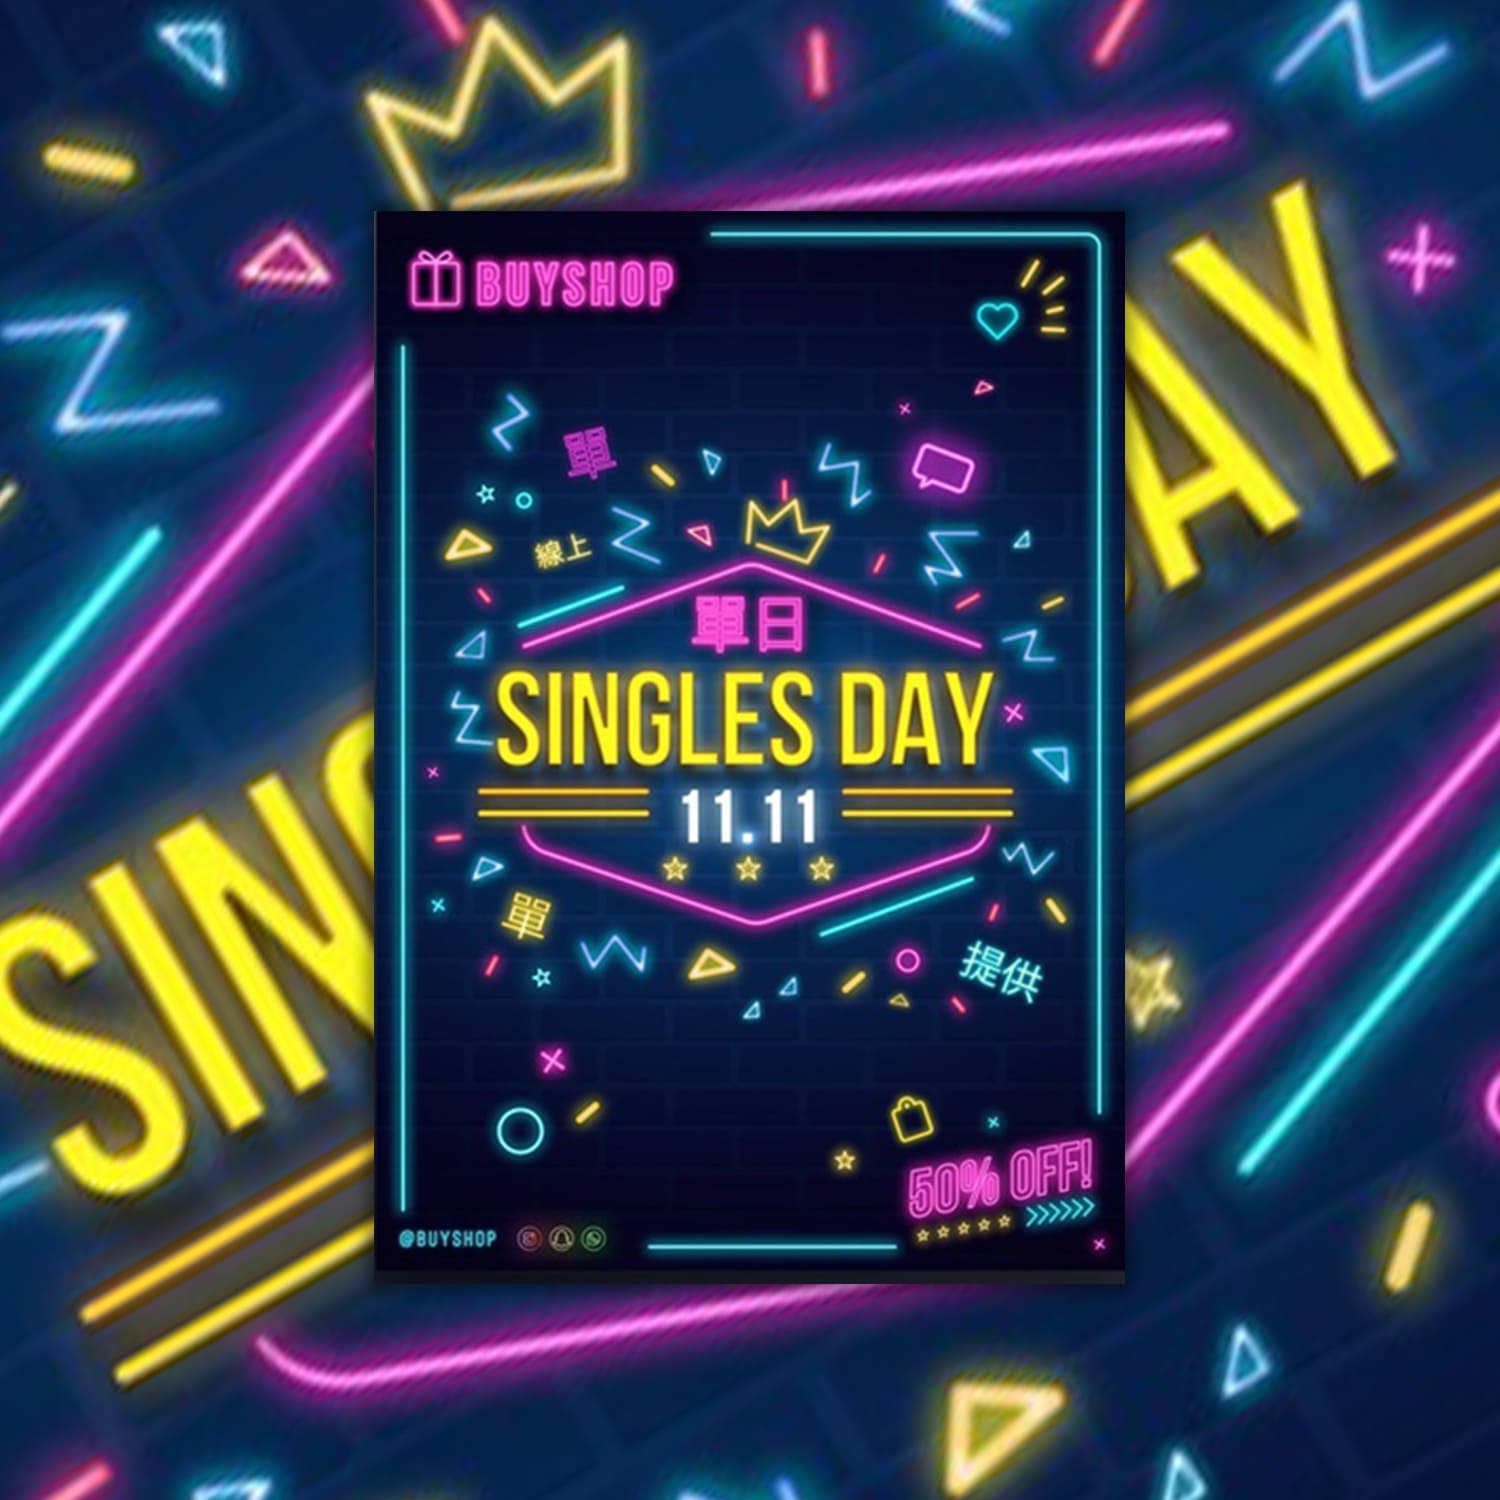 Black Singles' Day Neon Poster Template cover image.